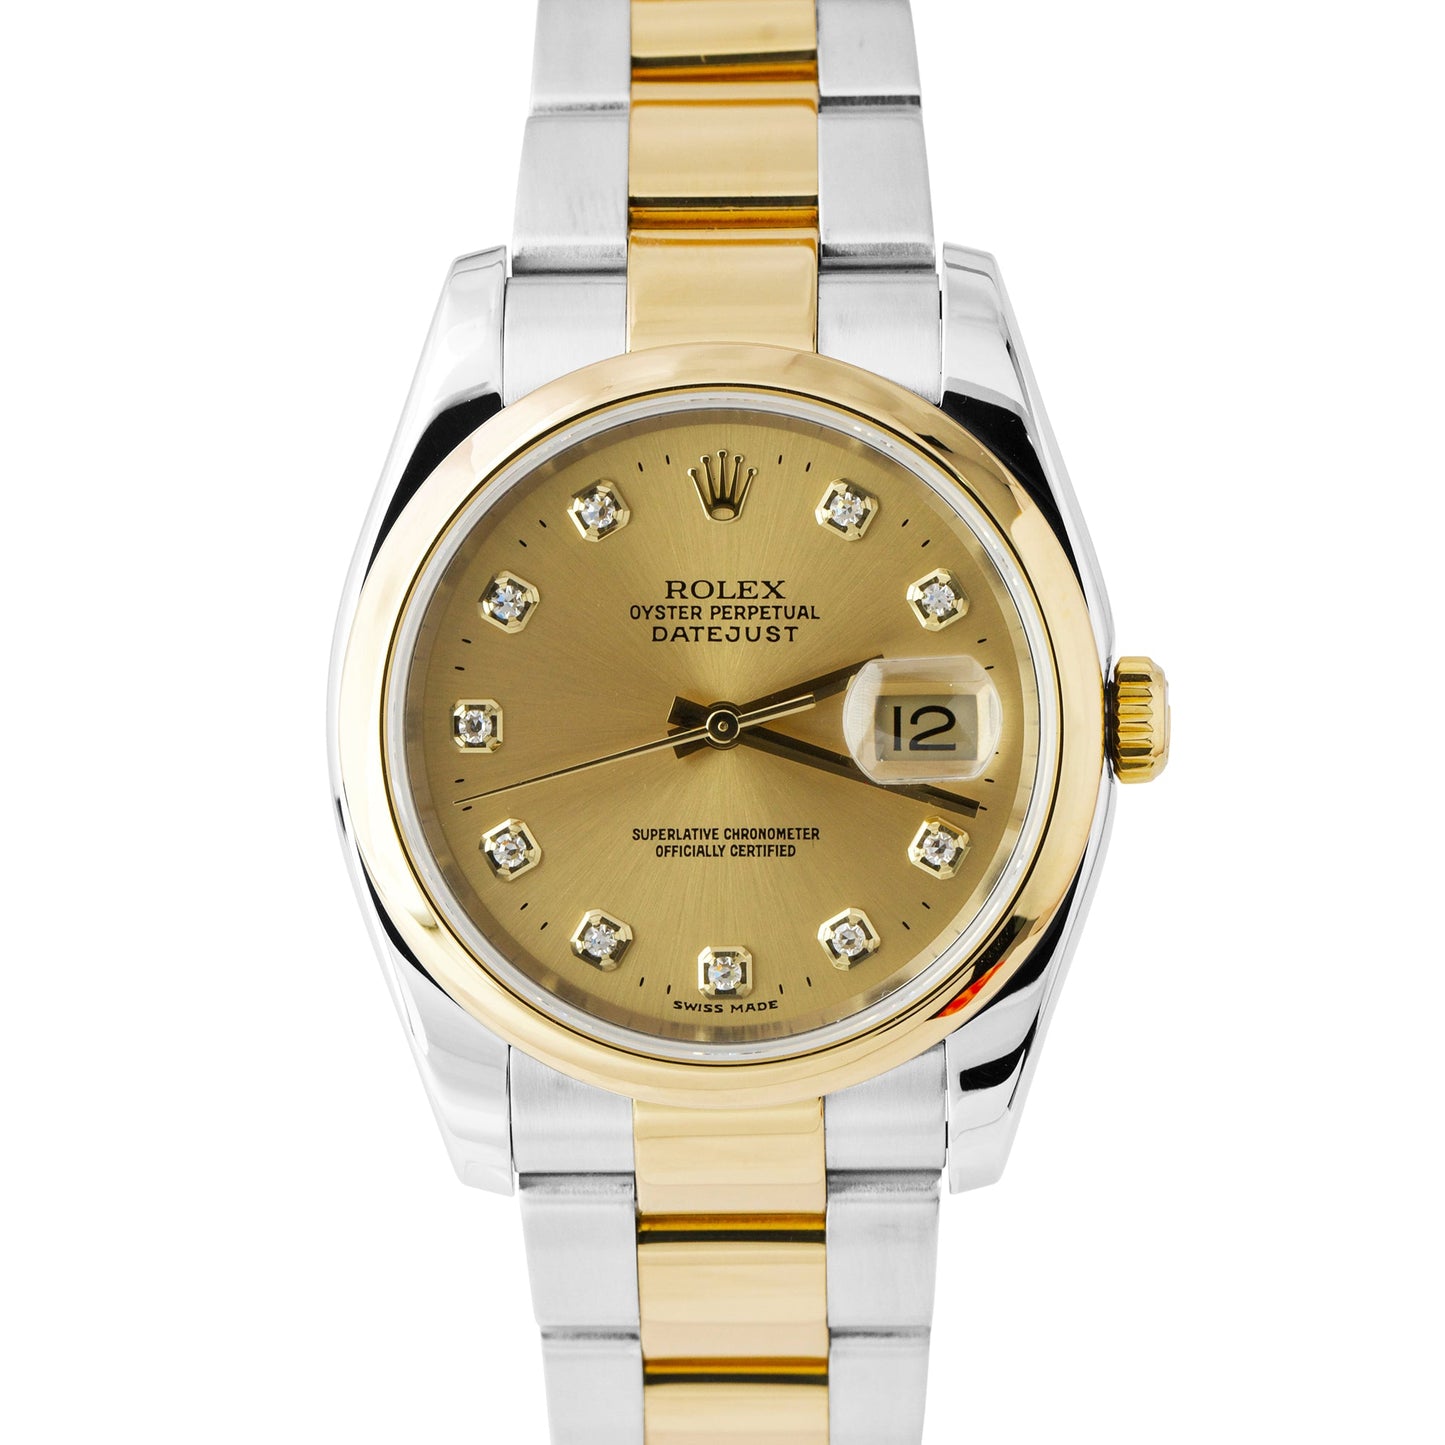 Rolex DateJust 36mm Two-Tone Gold Stainless Factory Diamond Champagne 116203